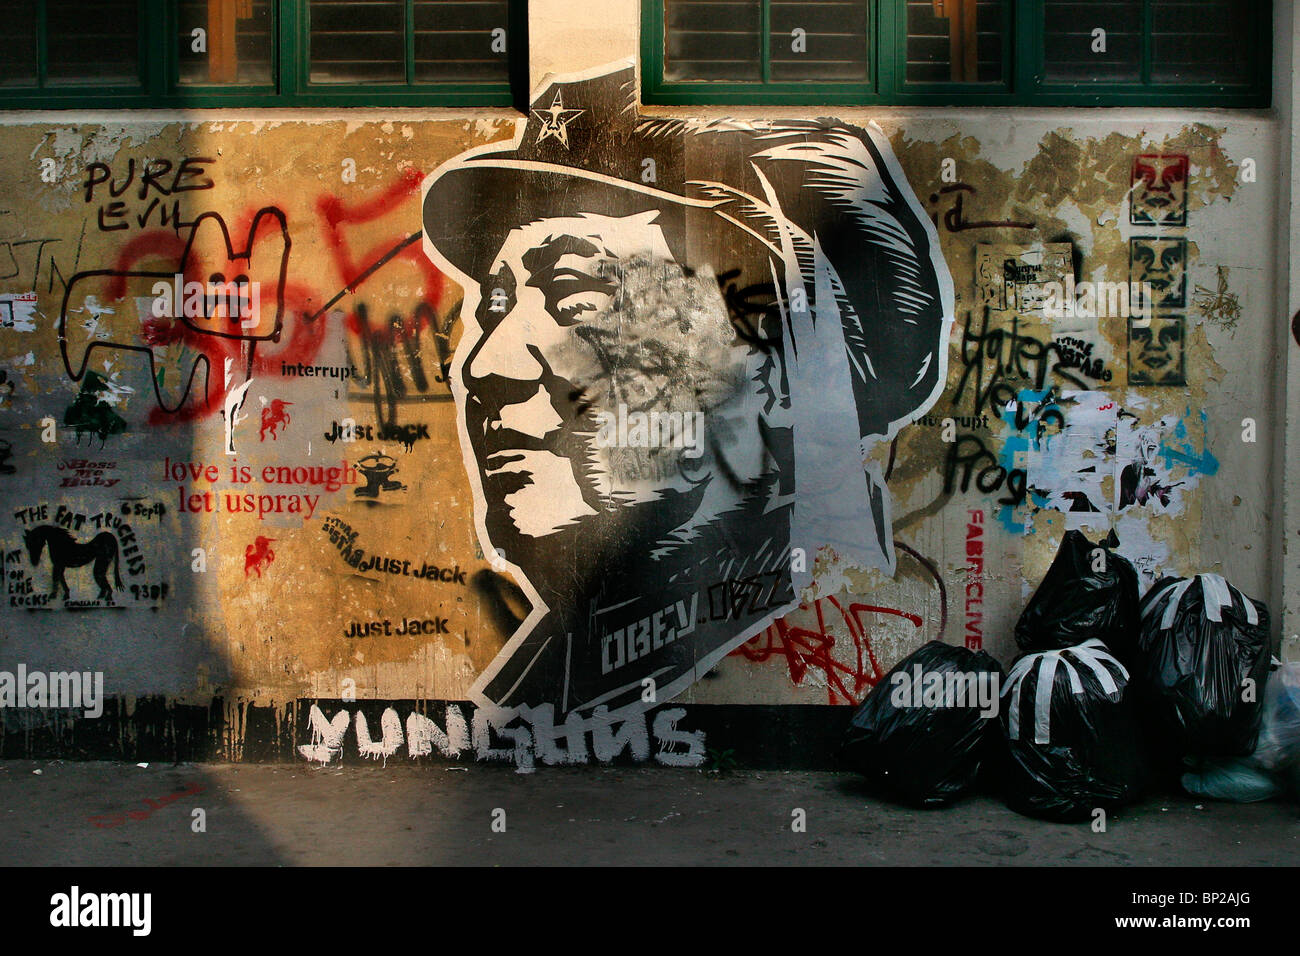 graffiti on a wall in london, featuring a painting of Chairman Mao in profile Stock Photo